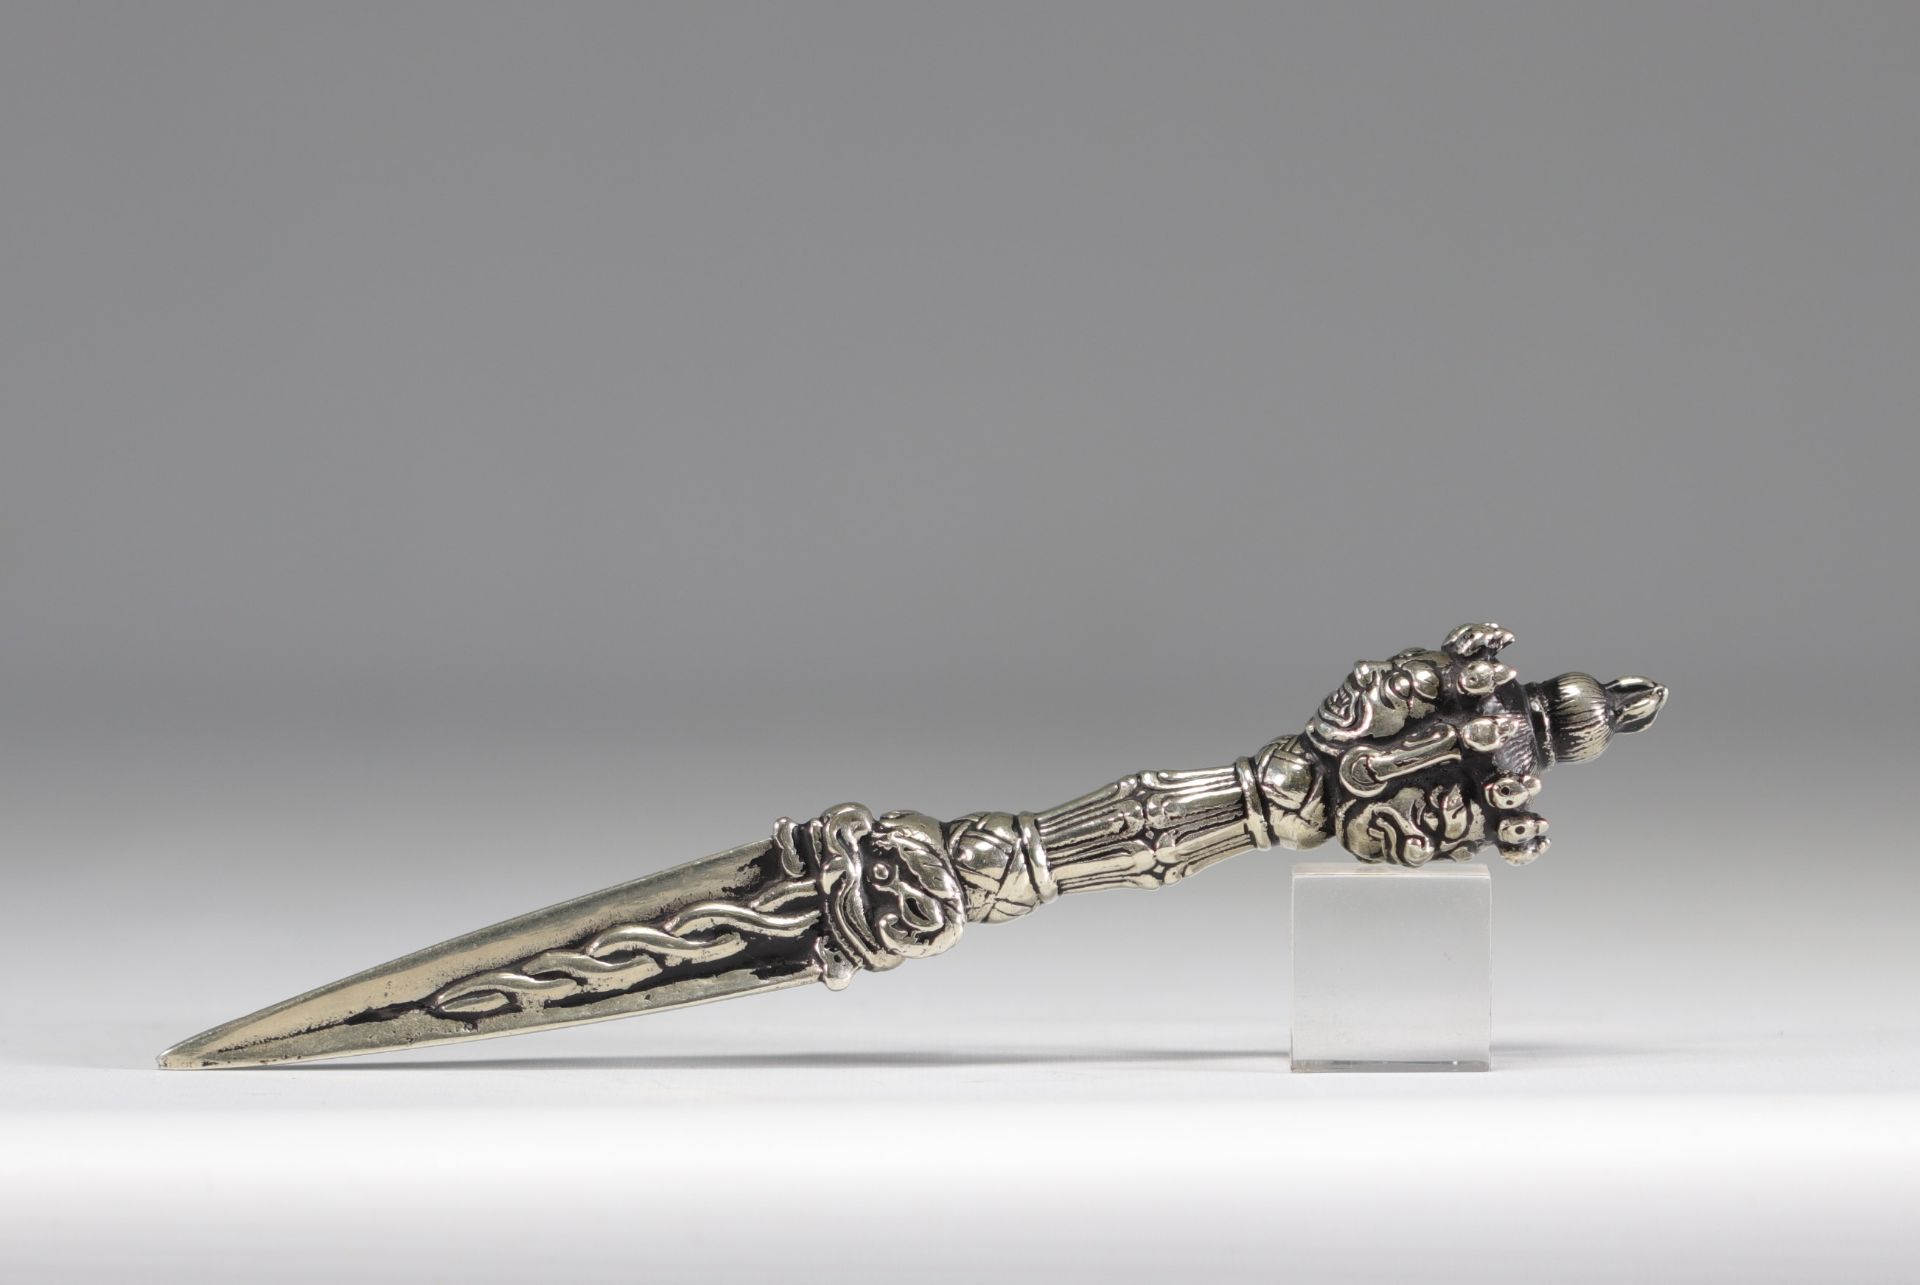 Solid silver Phurbu ritual dagger from China and Tibet - Image 3 of 3